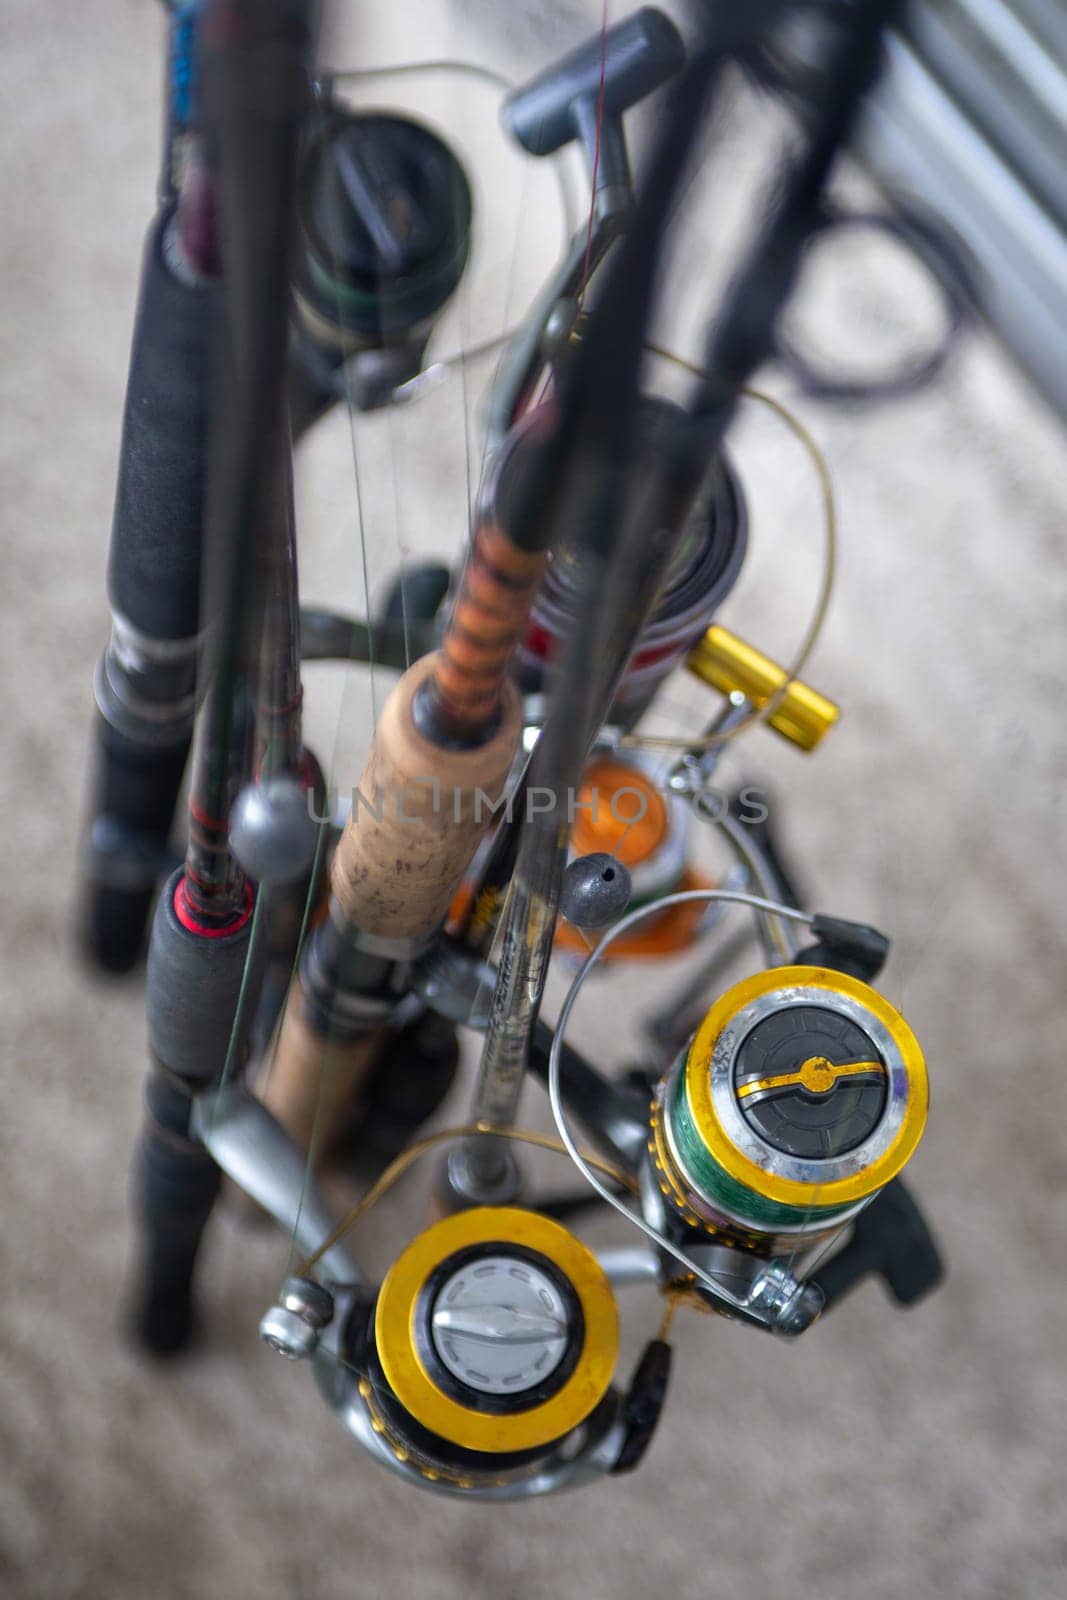 Group of Fishing Rods ready to go fish